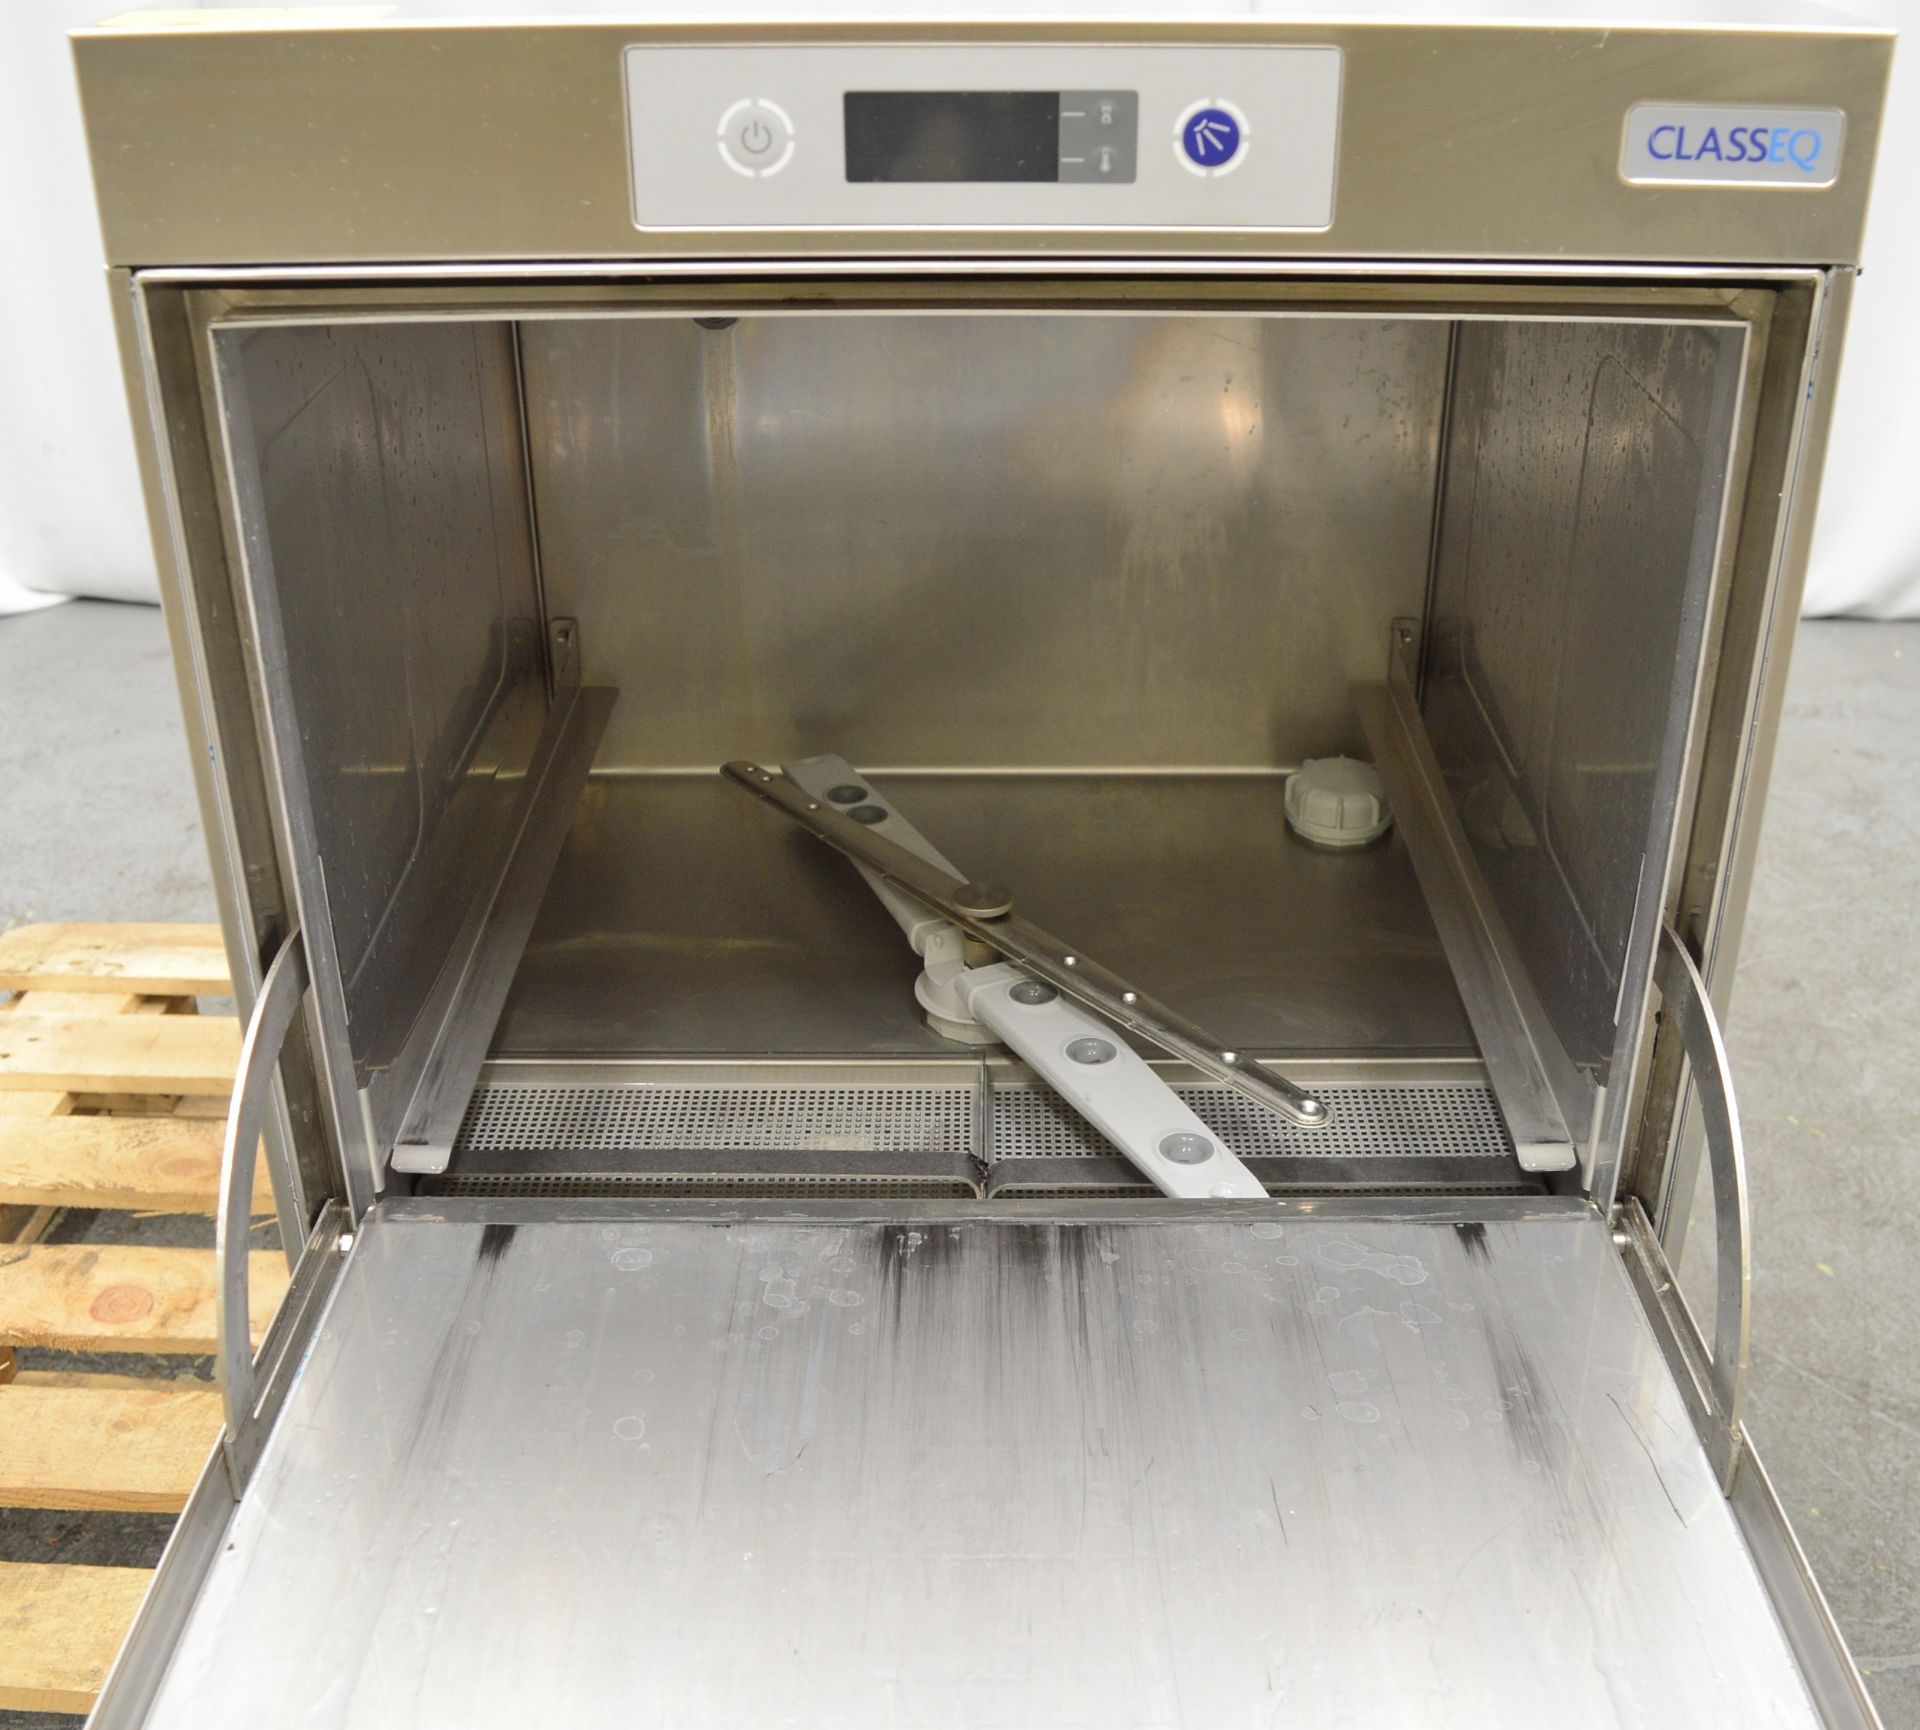 Class EQ D500DUOWS 6.58kW Dishwasher. - Image 5 of 6